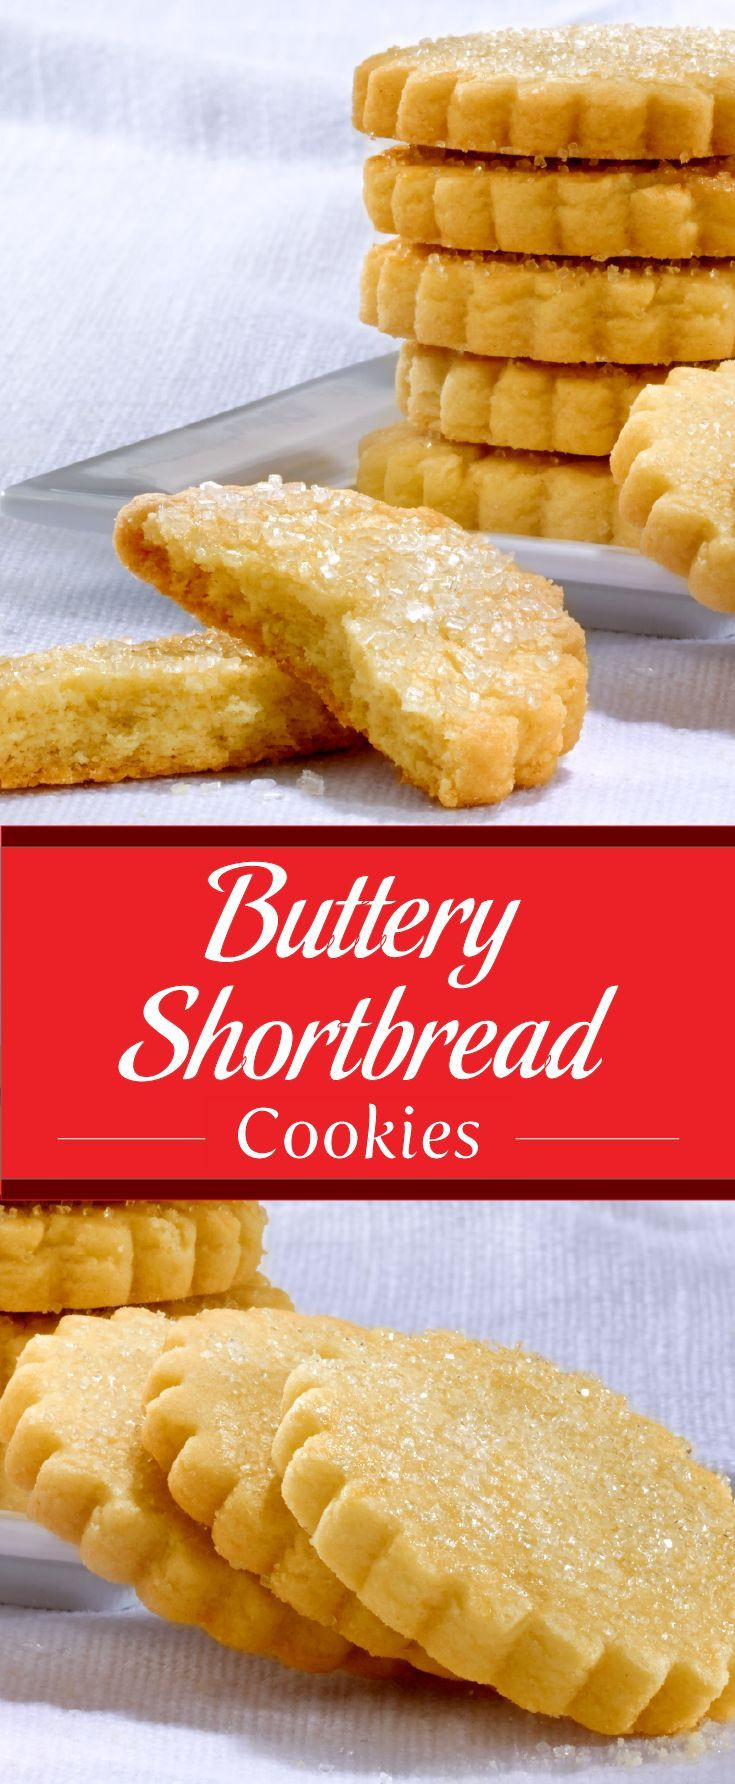 Gourmet Decorated Shortbread Cookies
 Perfect buttery shortbread cookies made with just 4